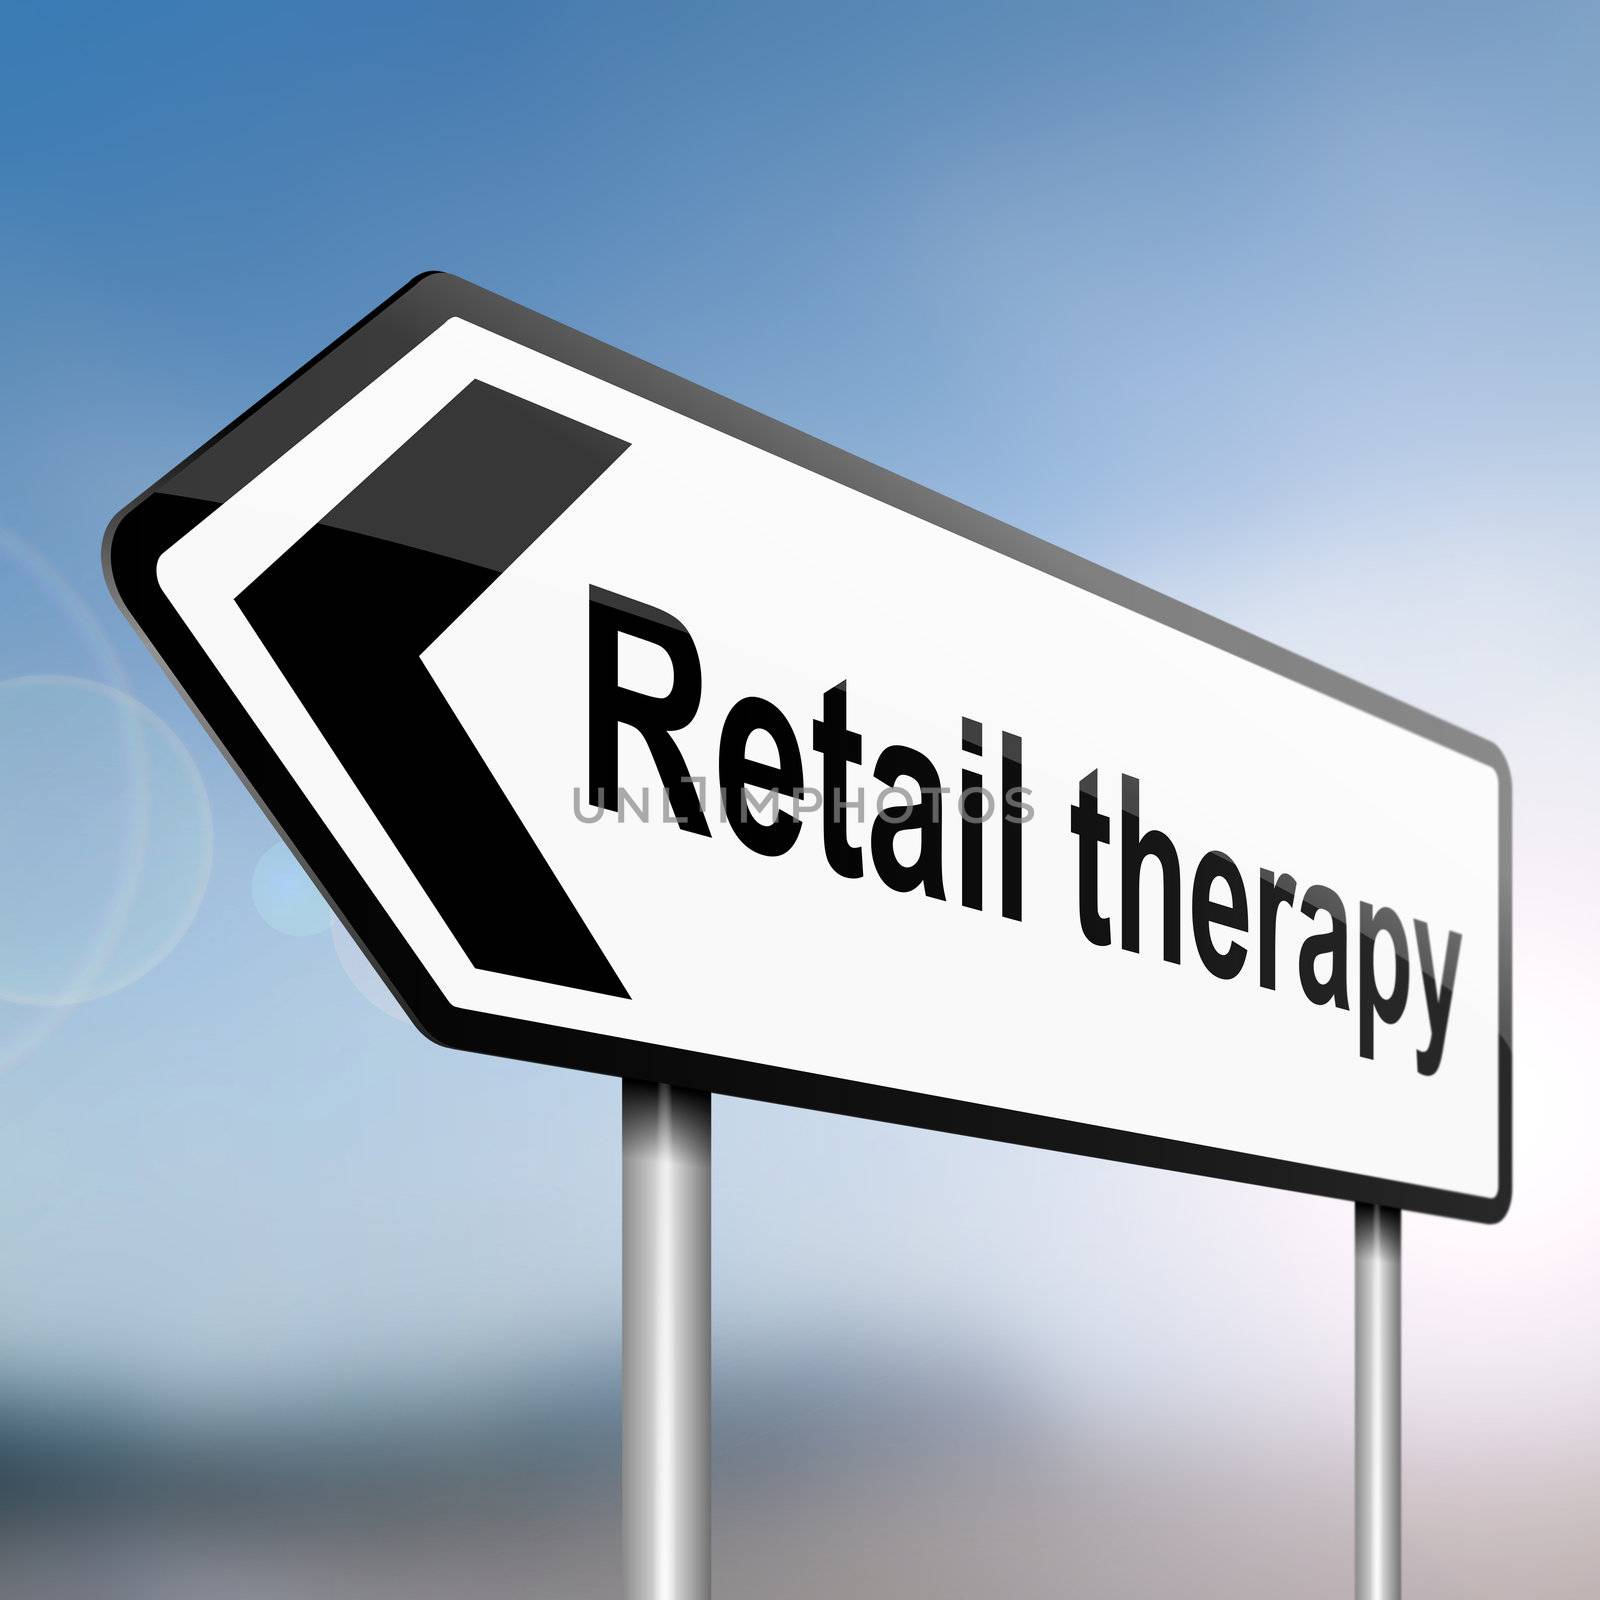 illustration depicting a sign post with directional arrow containing a retail therapy concept. Blurred background.